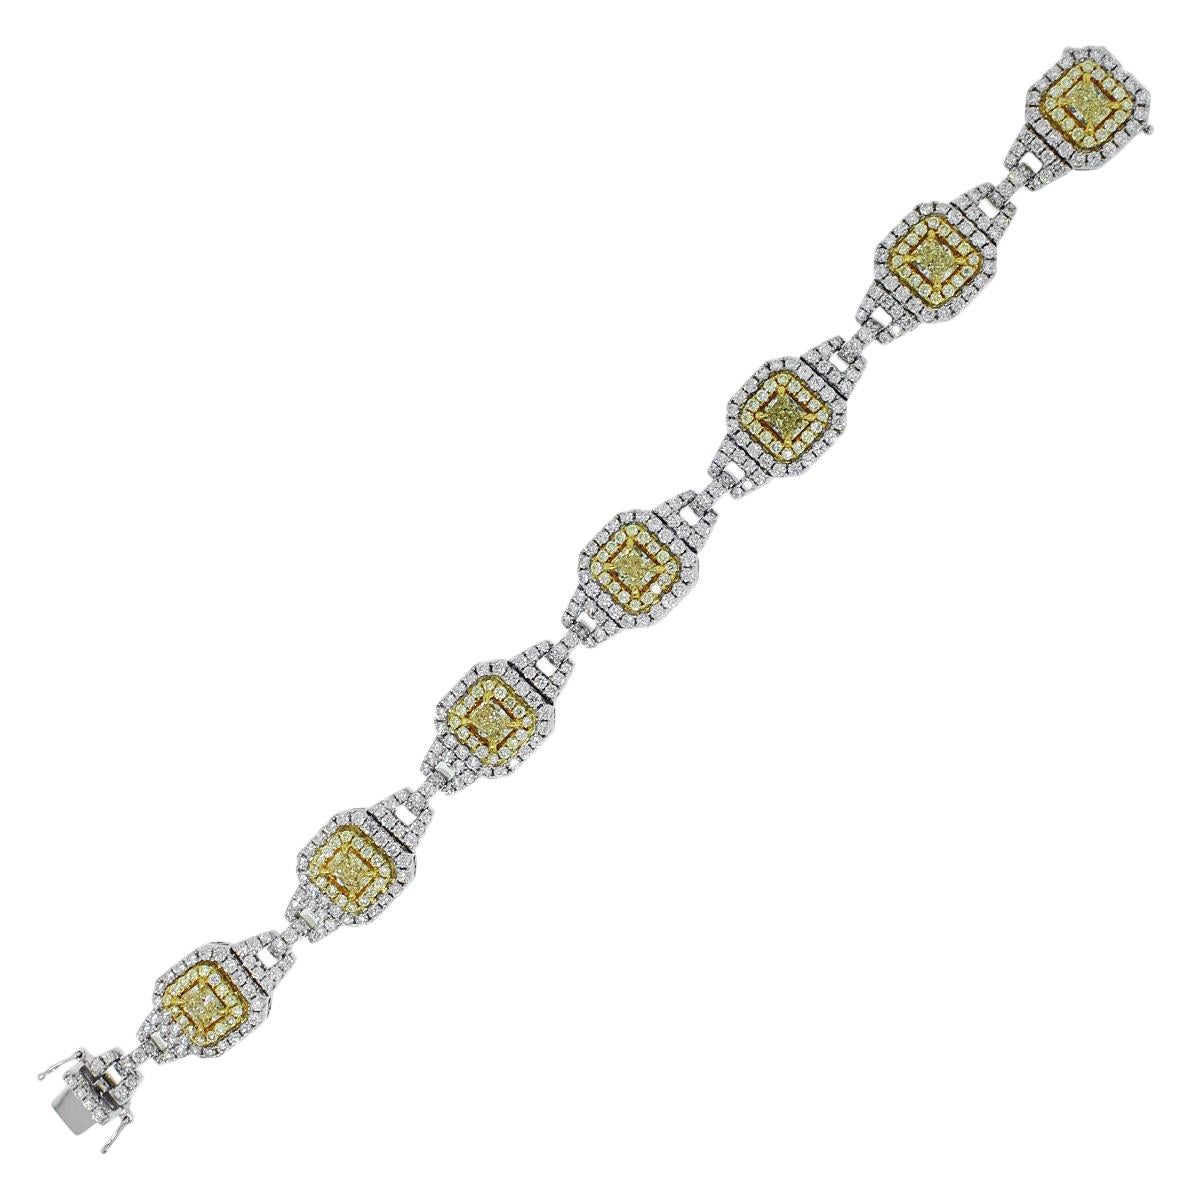 18k Two Tone 11.08ctw Diamond 7 Station Bracelet
Material: 18k Yellow Gold and 18k White Gold
Diamond Details: Approximately 3.80ctw of Yellow Diamonds. There are 7 larger, Radiant cut yellow Diamonds. Approximately 7.28ctw of Round Brilliant white